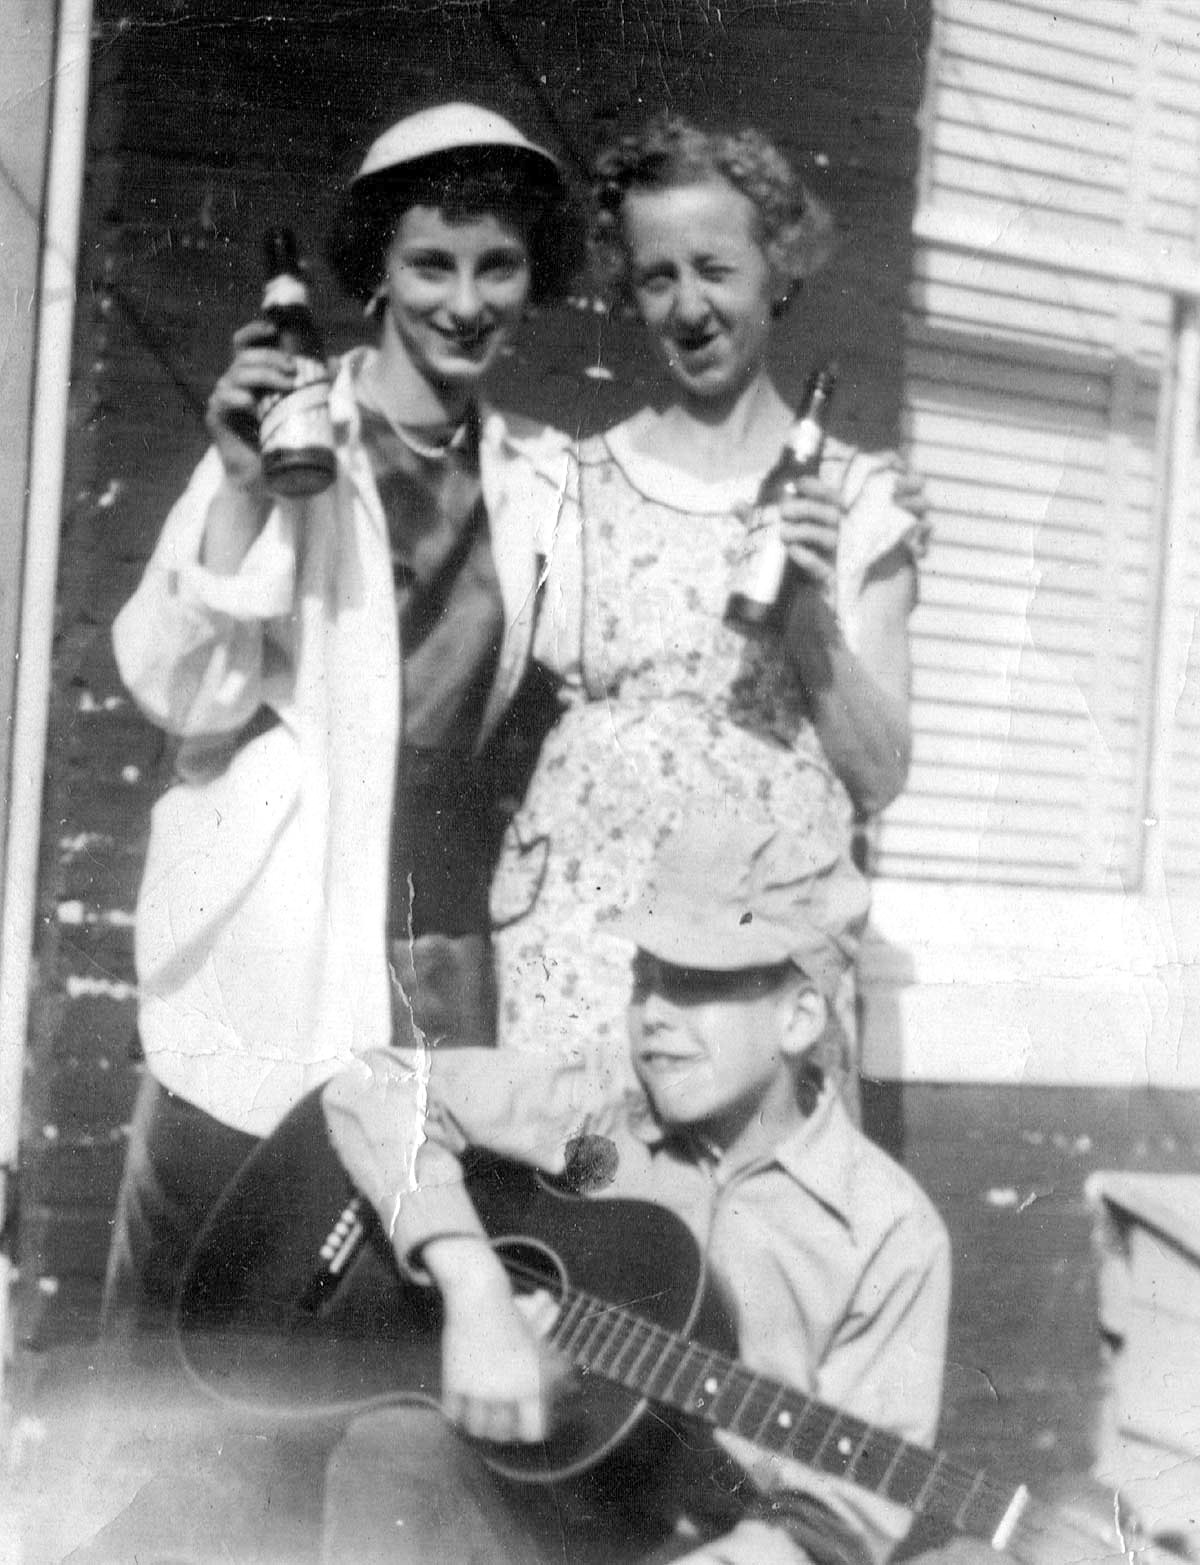 My first crush, Liz, on the left and my mother in her obligatory apron and I strumming the guitar in a poor imitation of the Singing Brakeman, Jimmy Rogers.

The beer is American (a local Baltimore brand) and the RR cap a gift from an uncle who worked as a conductor on the B&O. He had no children and at the end of each run he would check the passenger cars for forgotten comic books for me, which led to the largest collection in my part of the world. And yes in 1959 while I was away in the Navy that sweet lady on the right dumped it.

Picture taken in the rear of the 3300 block of Elmora Ave in Northeast Baltimore, circa 1948. View full size.